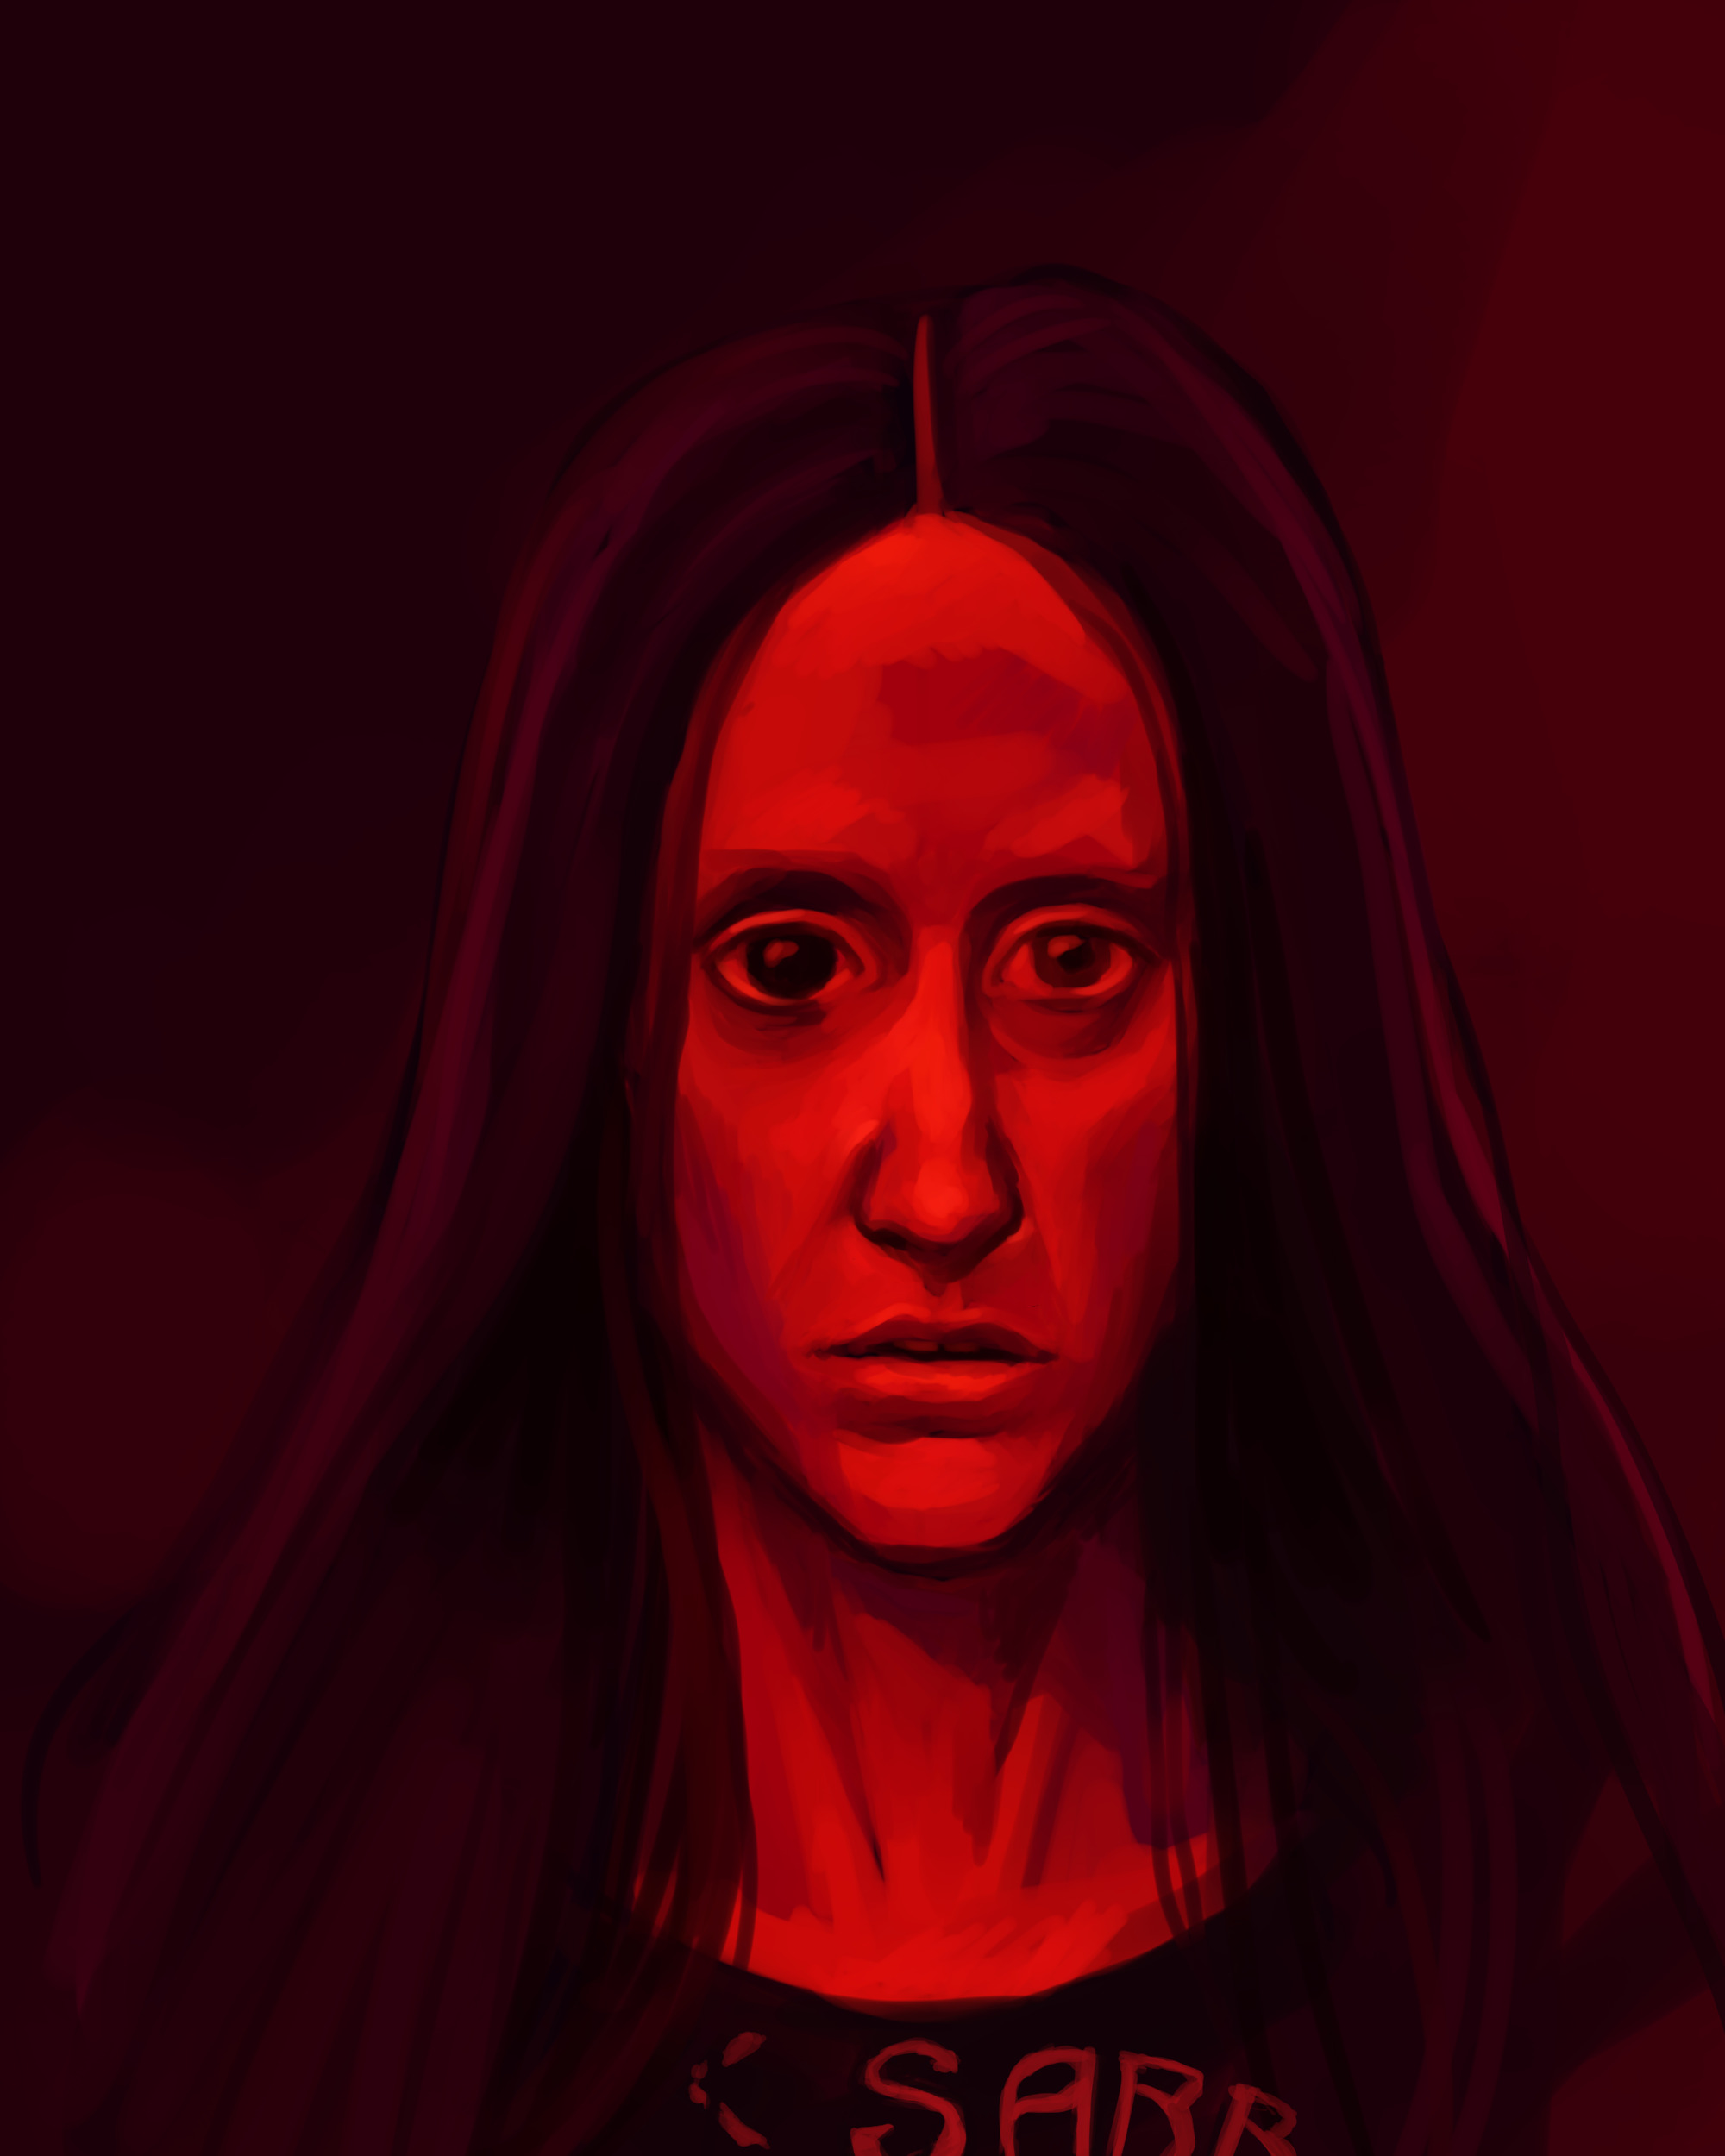 Digital painting Mandy from the movie Mandy. She is a long haired, light skinned woman with pupils two different sizes and a scar on her face.